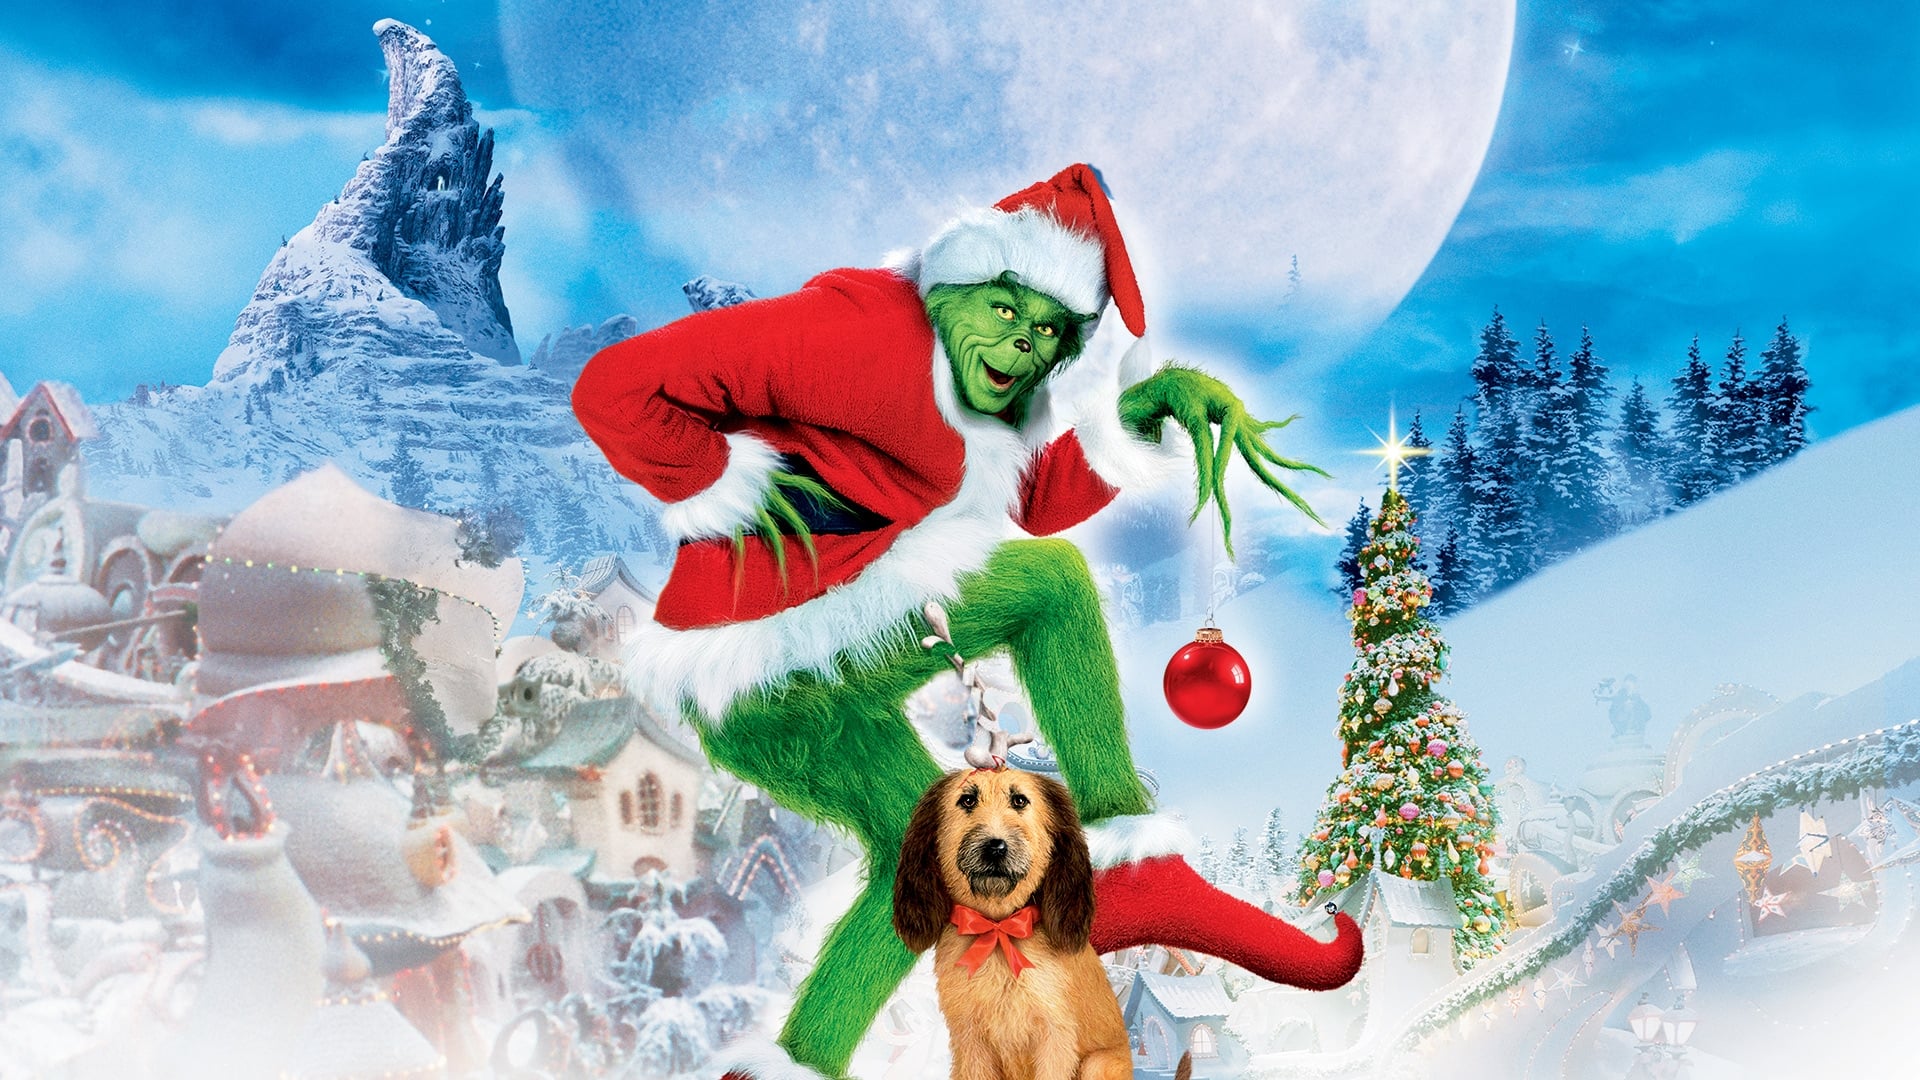 How the Grinch Stole Christmas BACKDROP